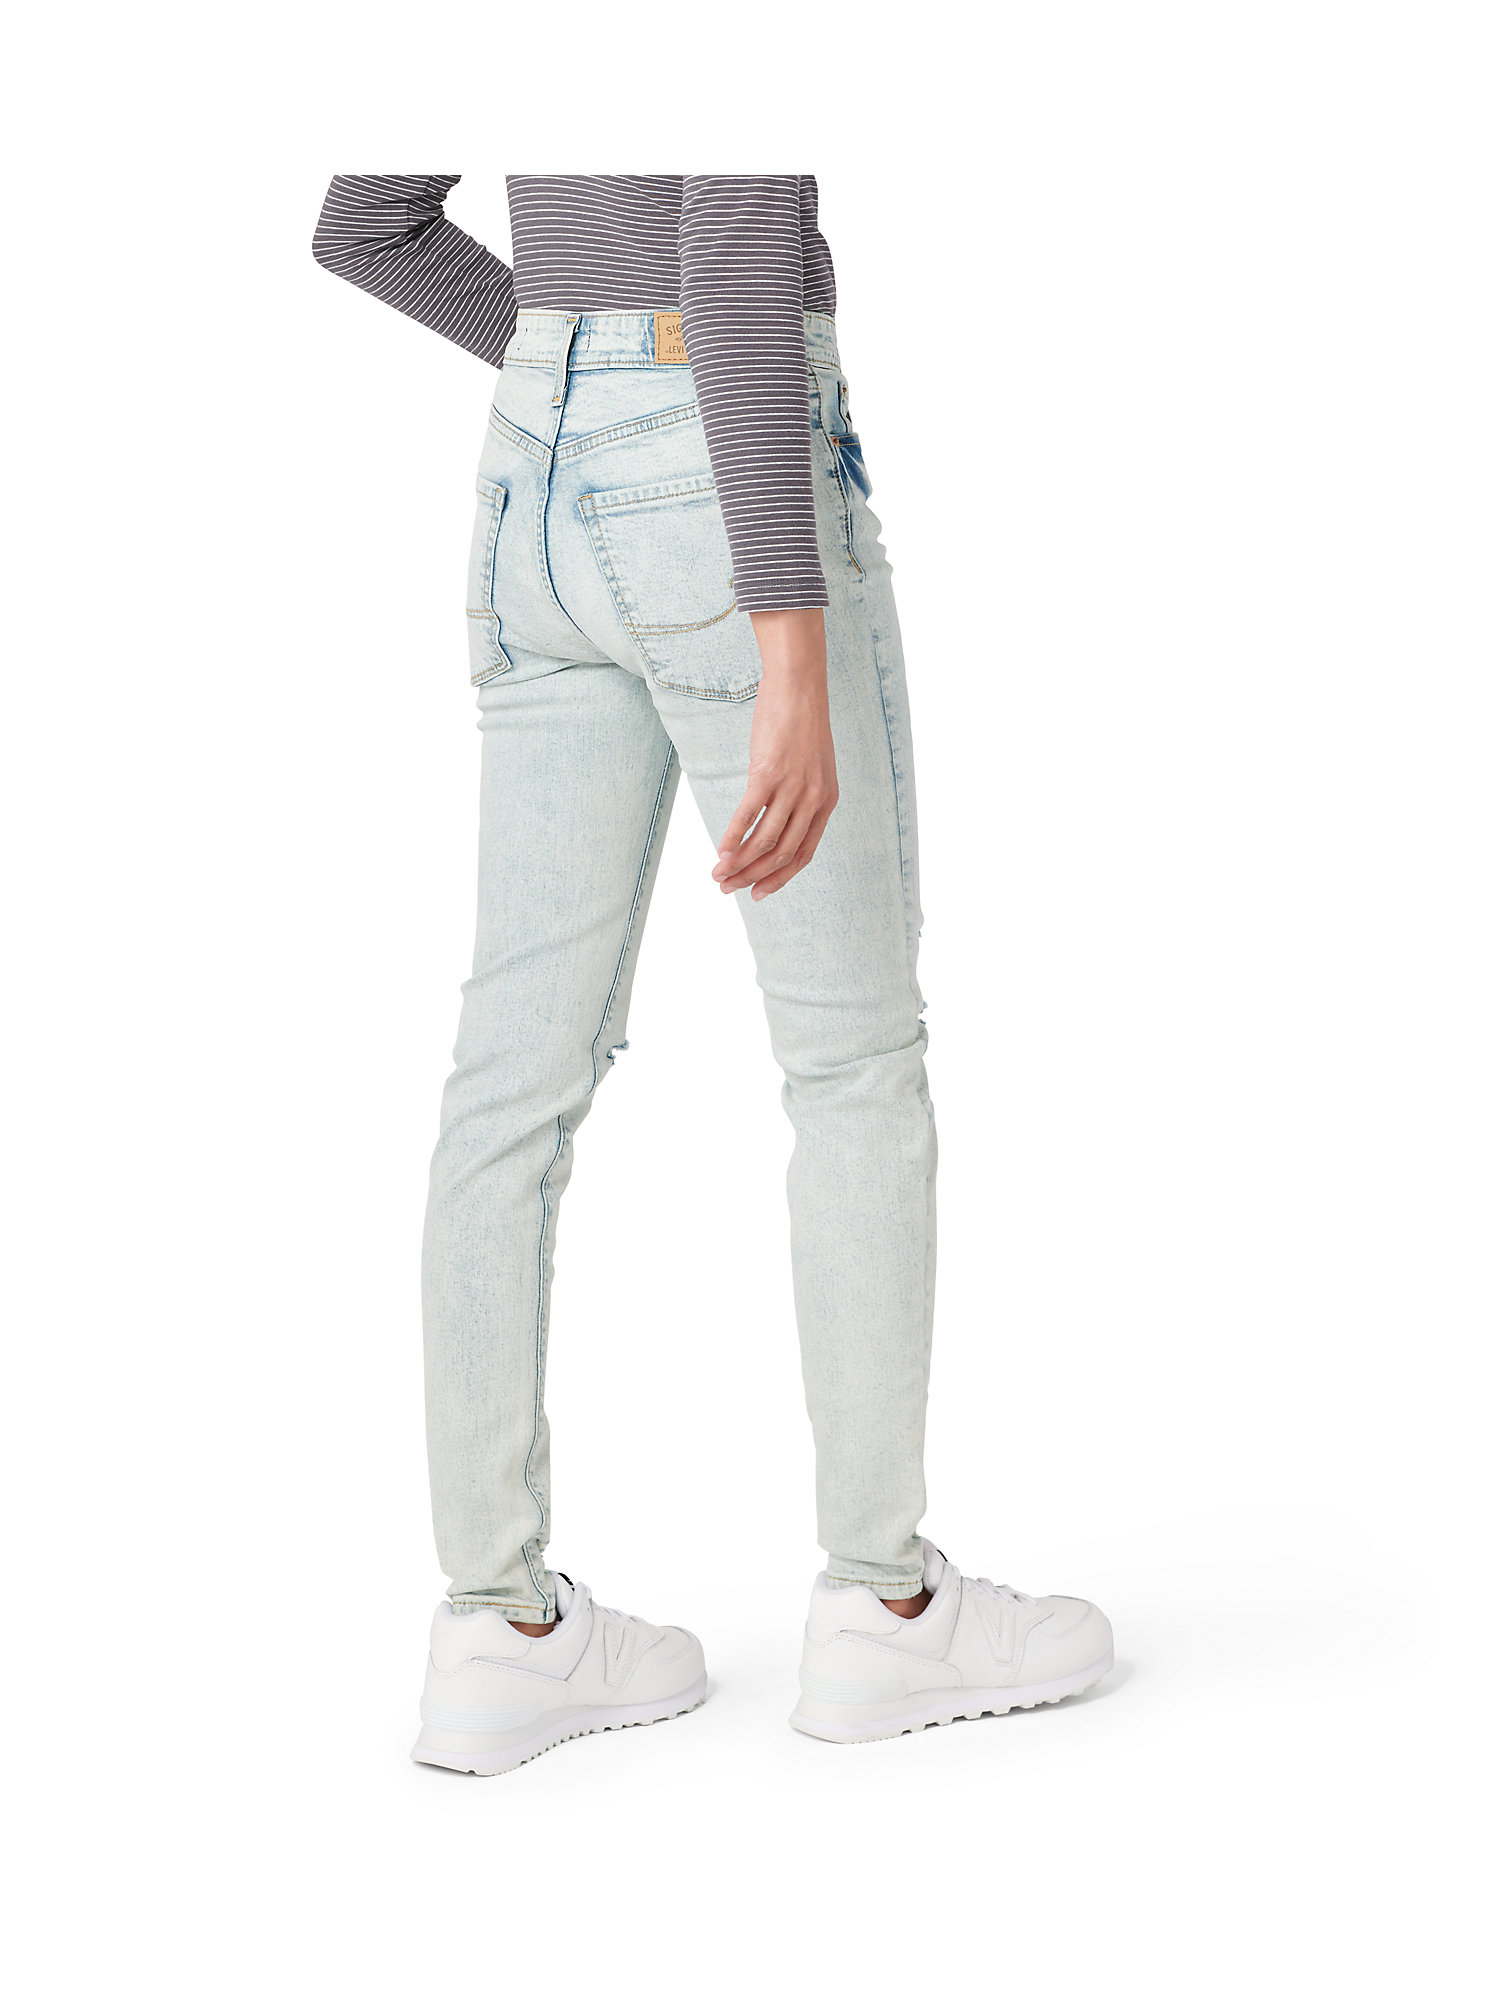 Signature by Levi Strauss & Co. Juniors' High Rise Jeggings - image 3 of 4